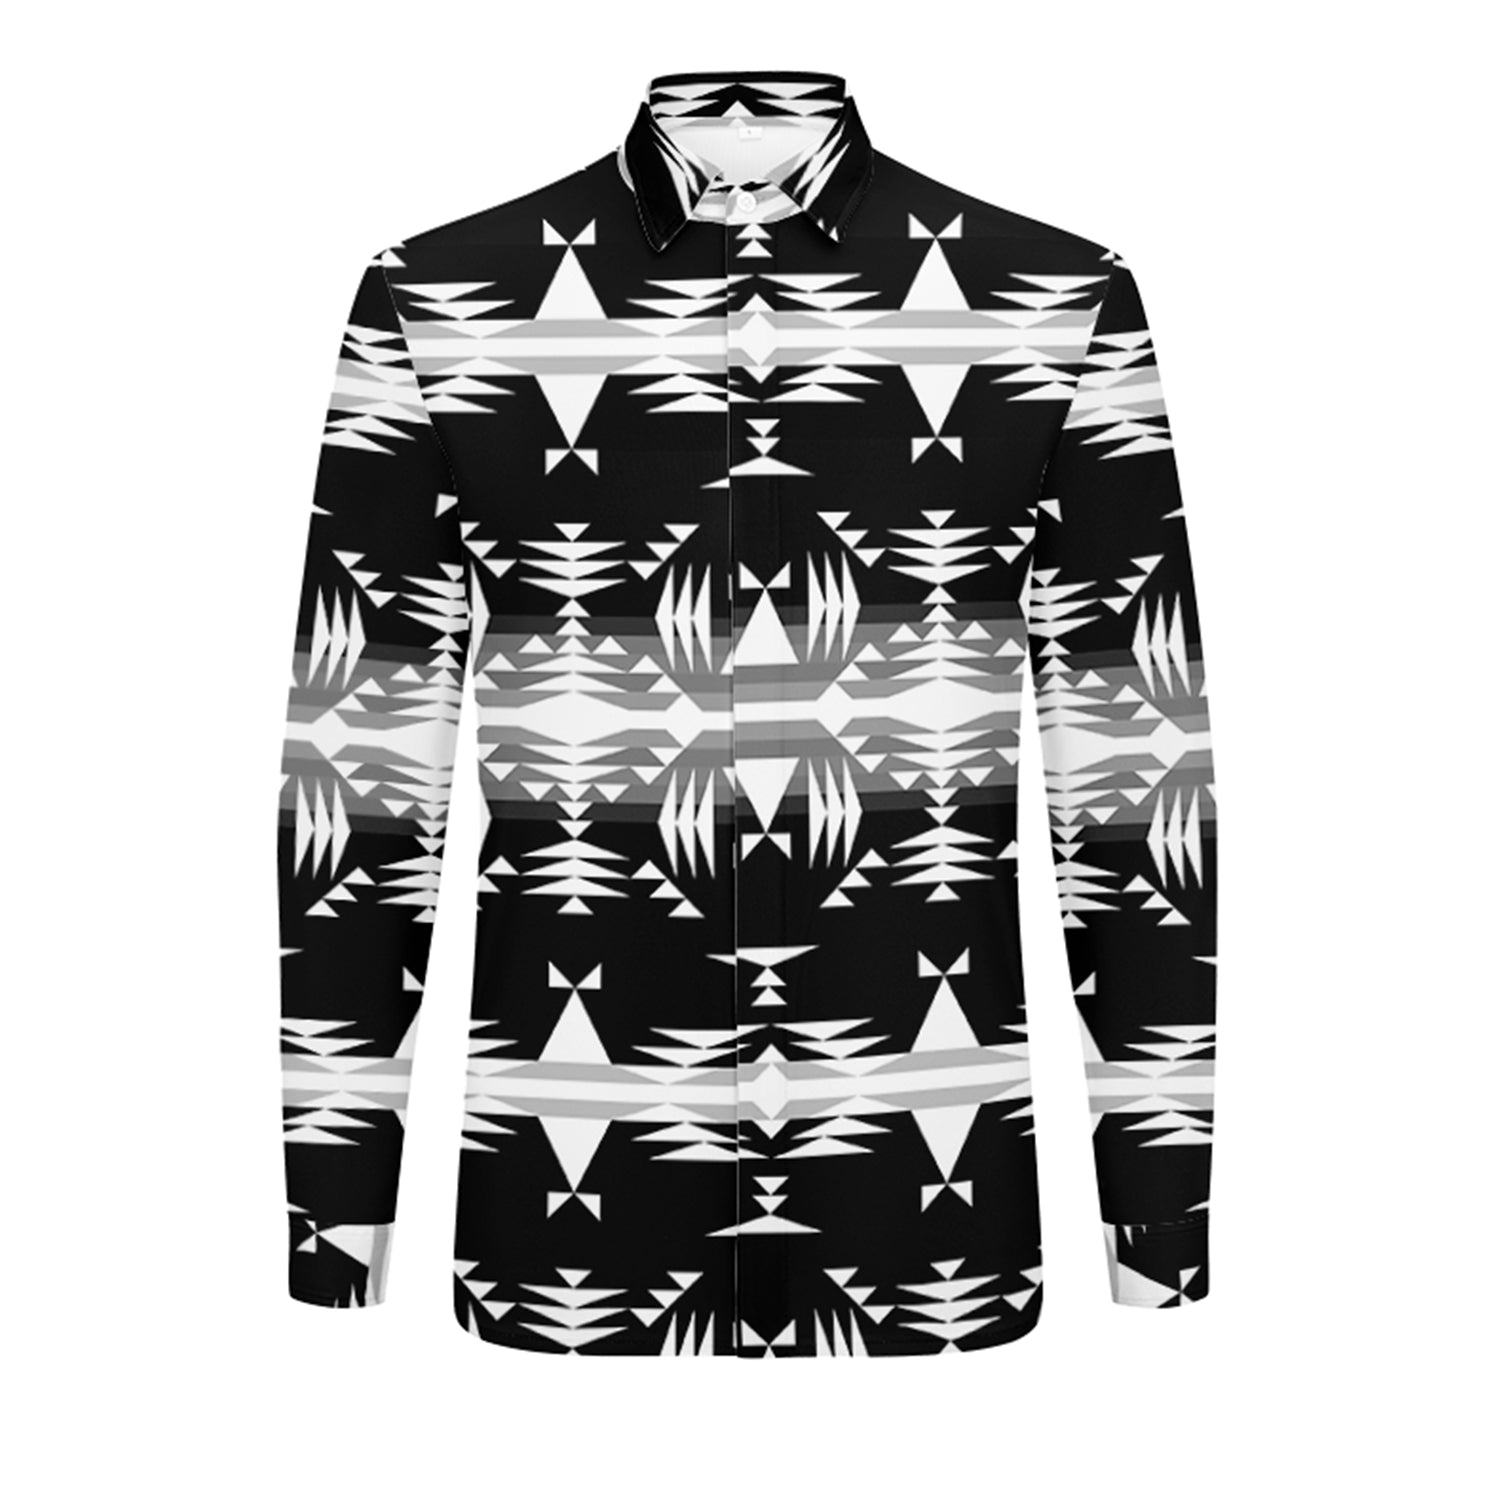 Between the Mountains Black and White Men's Long Sleeve Dress Shirt